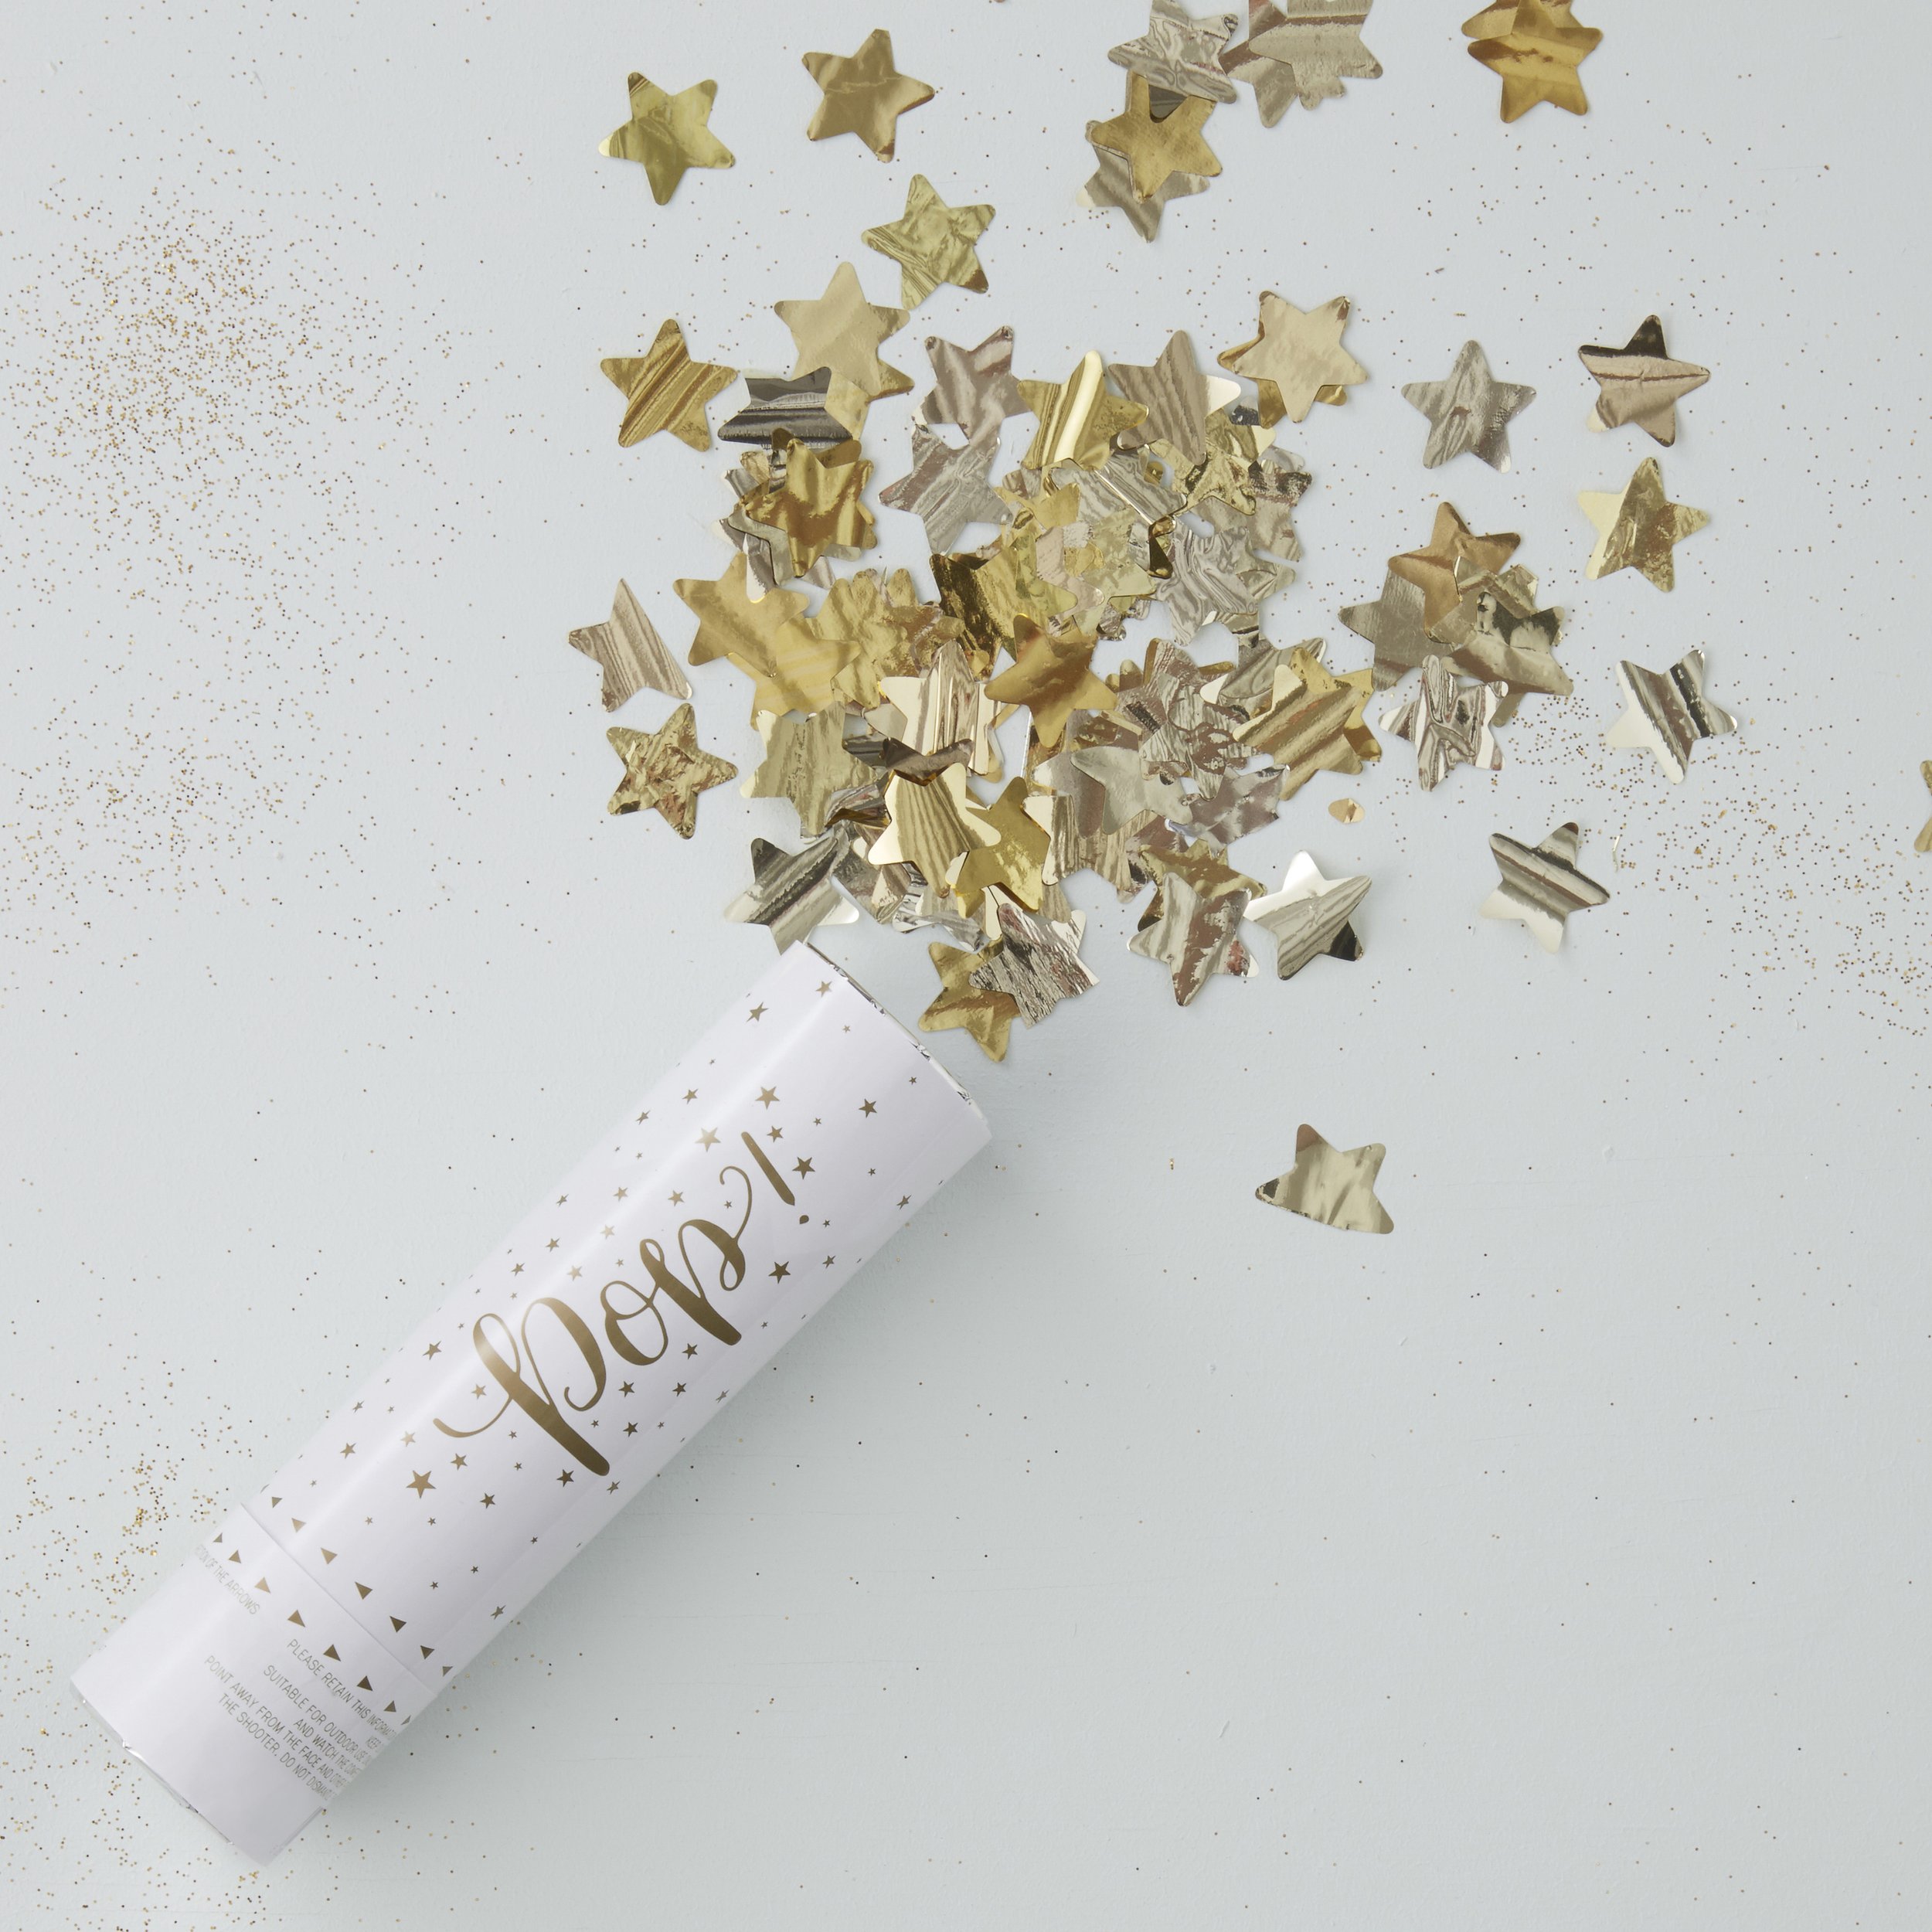 7.GINGER RAY Gold Compressed Air Star Confetti Cannon Shooter €2.47, 